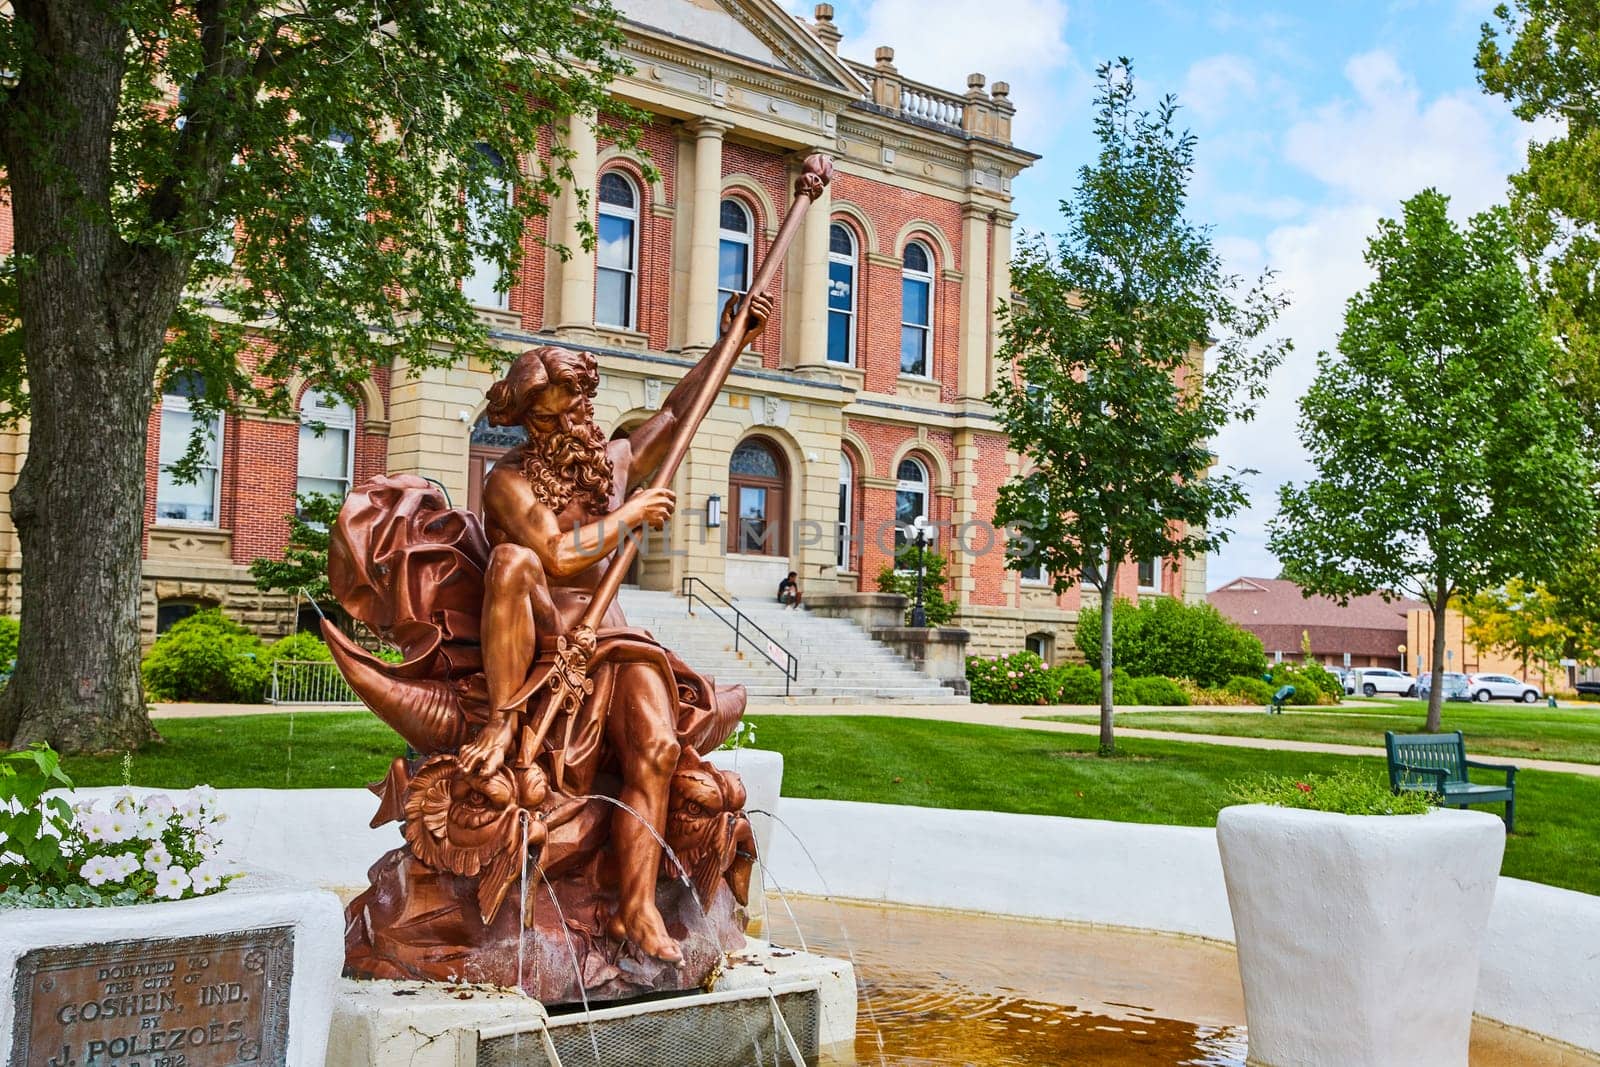 Image of Poseidon bronze statue in yellow fountain at Elkhart County courthouse in summer, law and order, IN